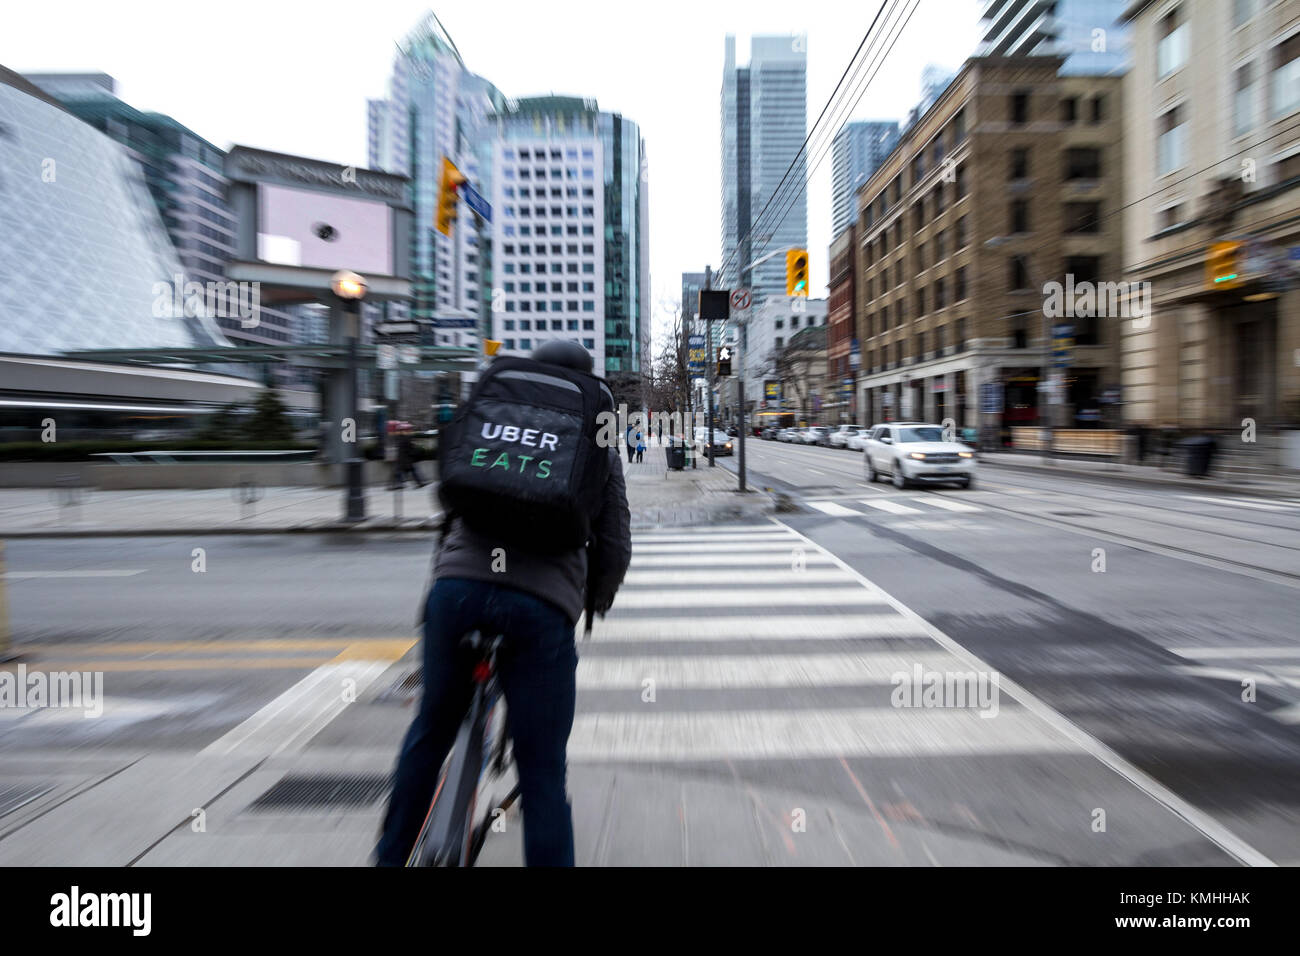 TORONTO, CANADA - DECEMBER 31, 2016: Uber Eats delivery man on a bicycle waiting to cross a street in the center of Toronto, Ontario, with a motion bl Stock Photo